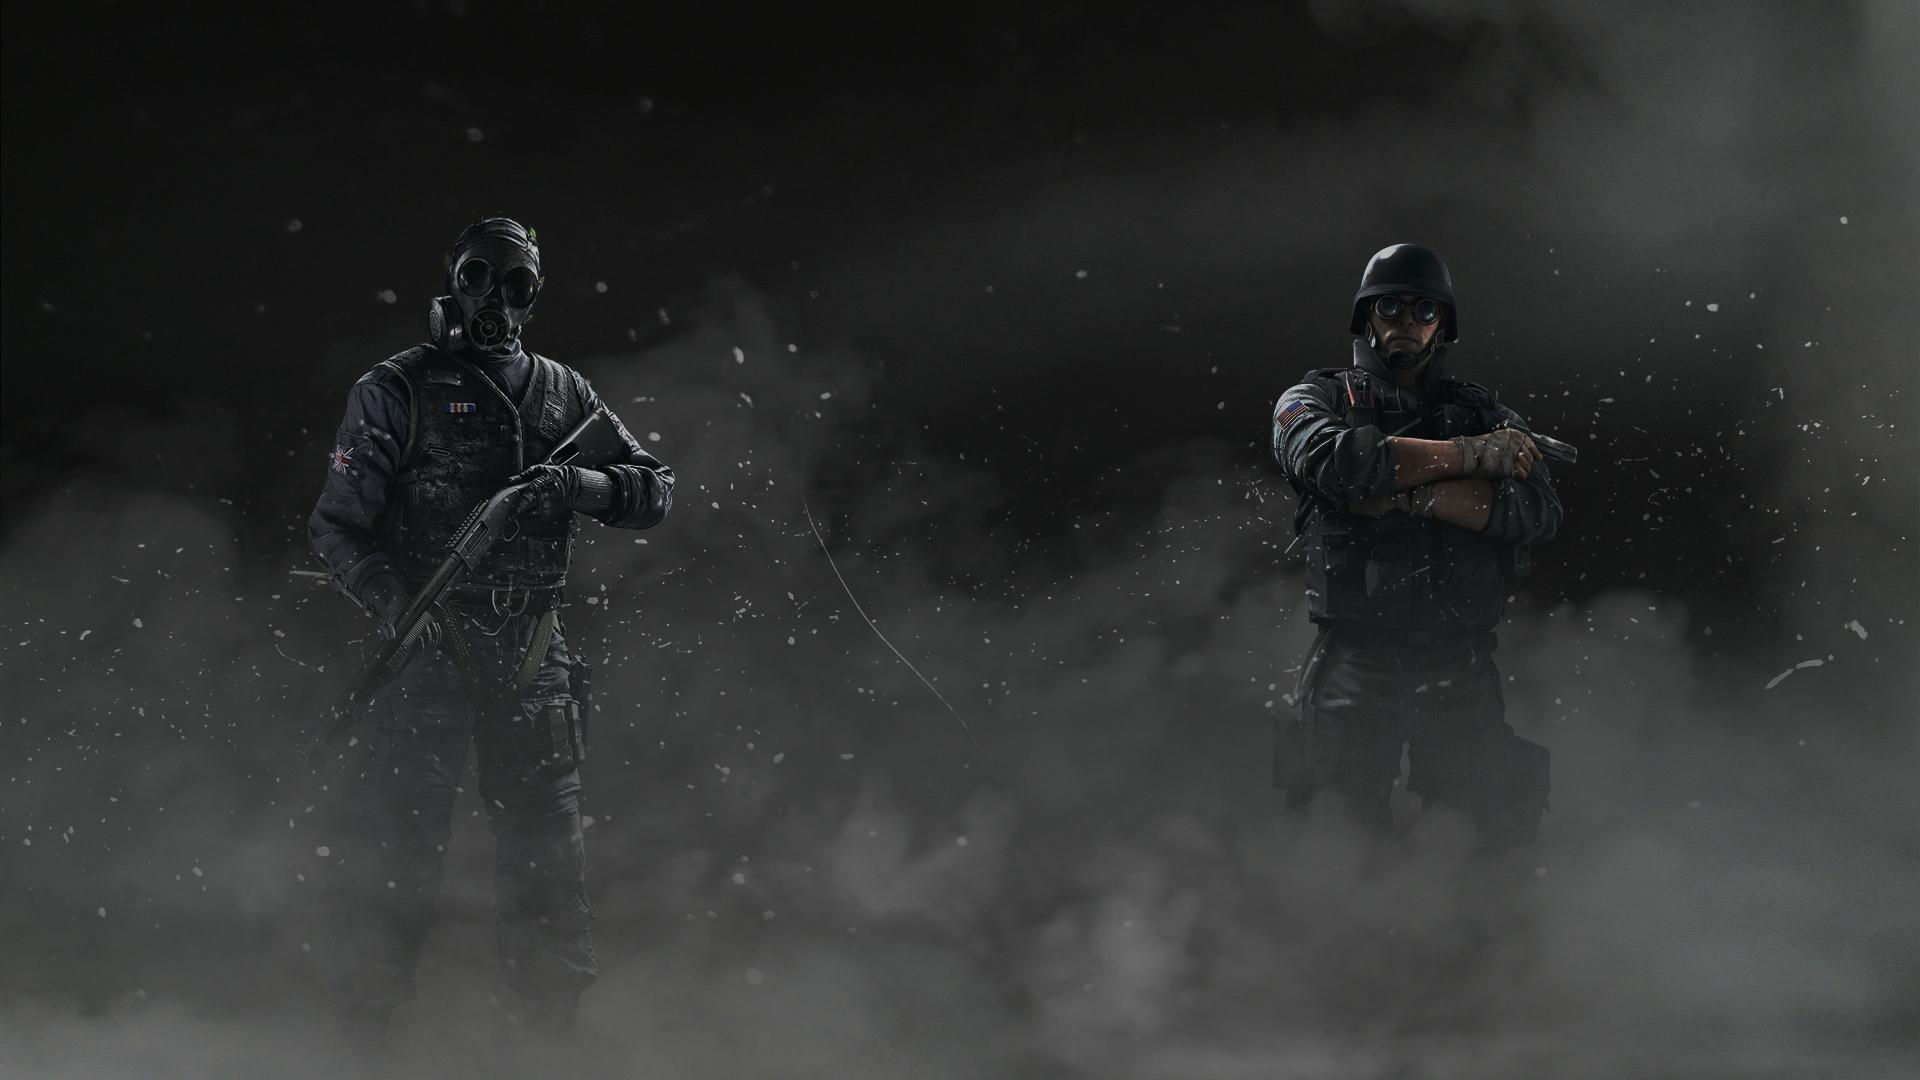 No Text On The Thatcher And Thermite Wallpaper As Requested By